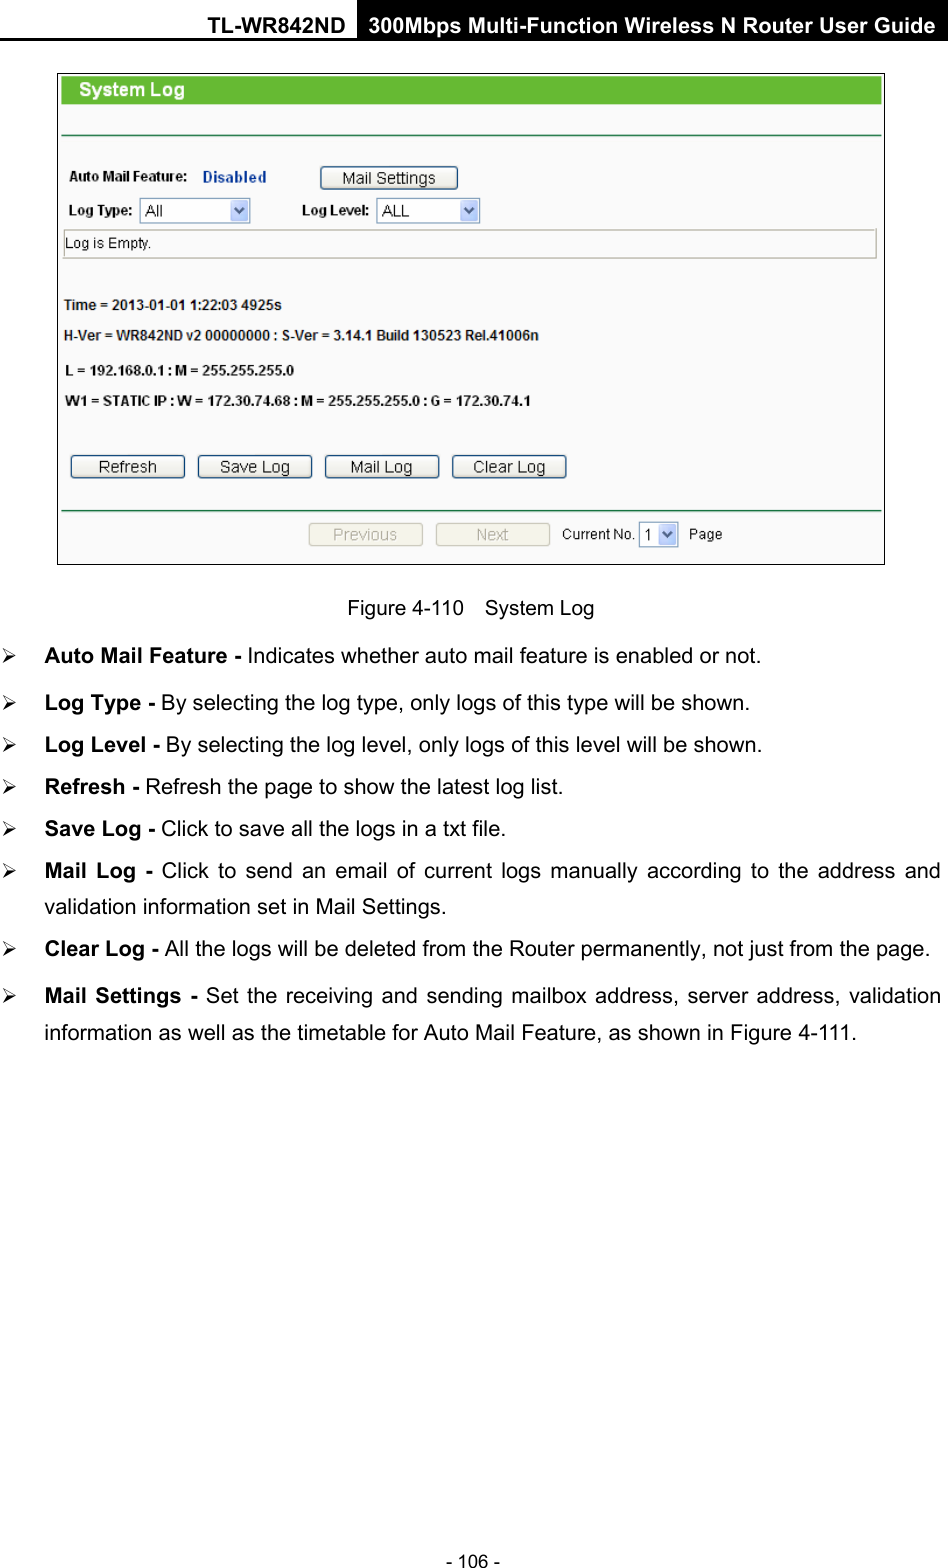 TL-WR842ND 300Mbps Multi-Function Wireless N Router User Guide  - 106 -  Figure 4-110  System Log  Auto Mail Feature - Indicates whether auto mail feature is enabled or not.    Log Type - By selecting the log type, only logs of this type will be shown.  Log Level - By selecting the log level, only logs of this level will be shown.  Refresh - Refresh the page to show the latest log list.    Save Log - Click to save all the logs in a txt file.    Mail Log  - Click to send an email of current logs manually according to the address and validation information set in Mail Settings.    Clear Log - All the logs will be deleted from the Router permanently, not just from the page.    Mail Settings  - Set the receiving and sending mailbox address, server address, validation information as well as the timetable for Auto Mail Feature, as shown in Figure 4-111. 